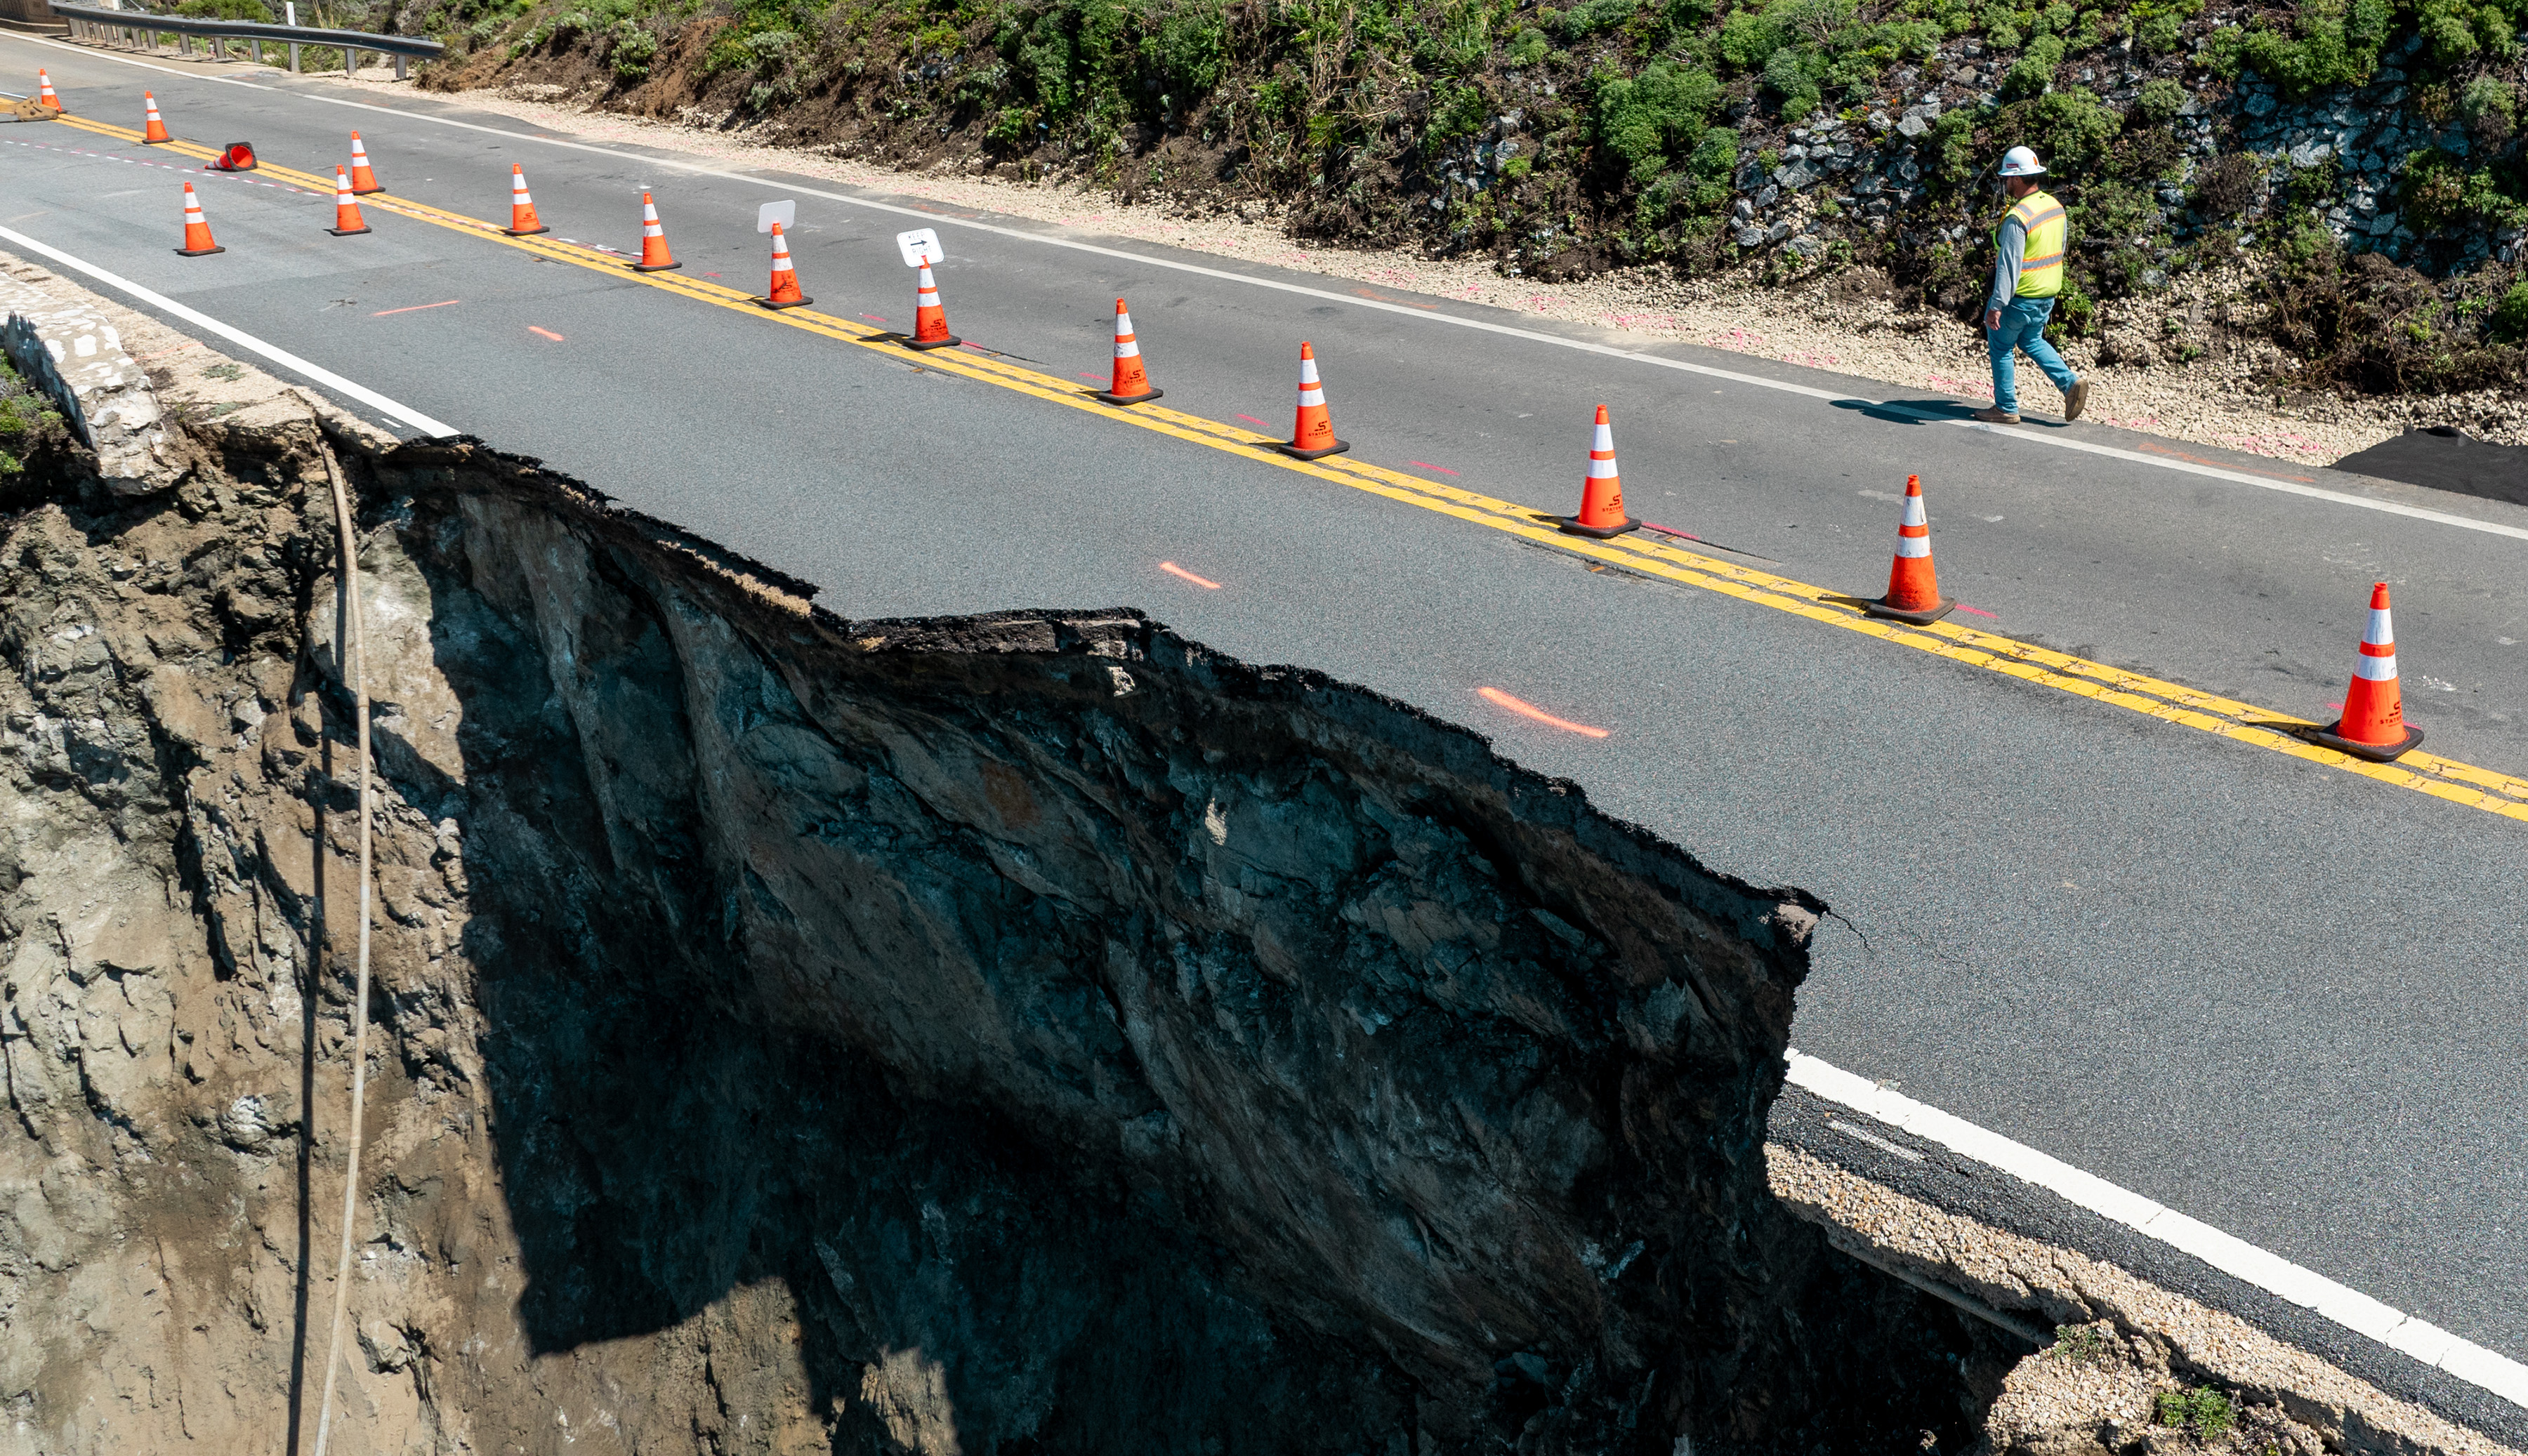 A road has collapsed at the edge, with a deep chasm beside it. Traffic cones mark the area; a person walks by, wearing a safety vest.